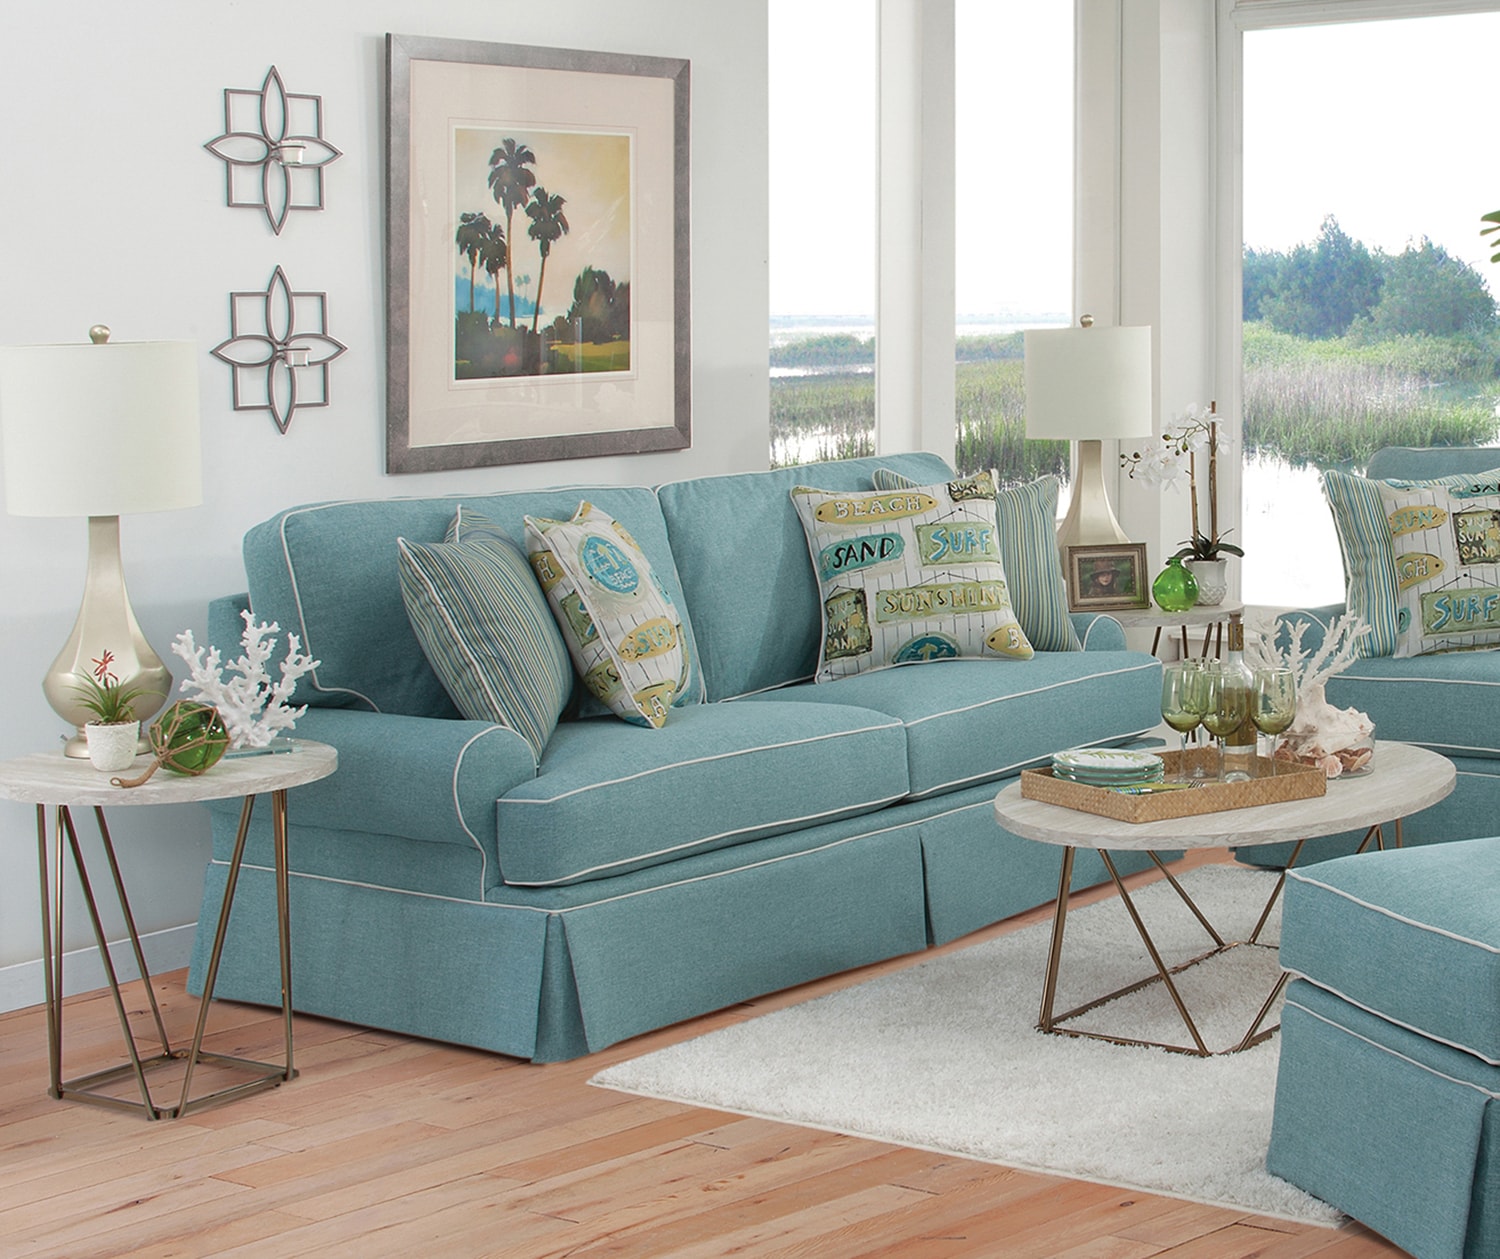 Shop Furniture, Home Decor & Outdoor Living Online  Cushions on sofa,  Beige sofa living room, Teal living rooms